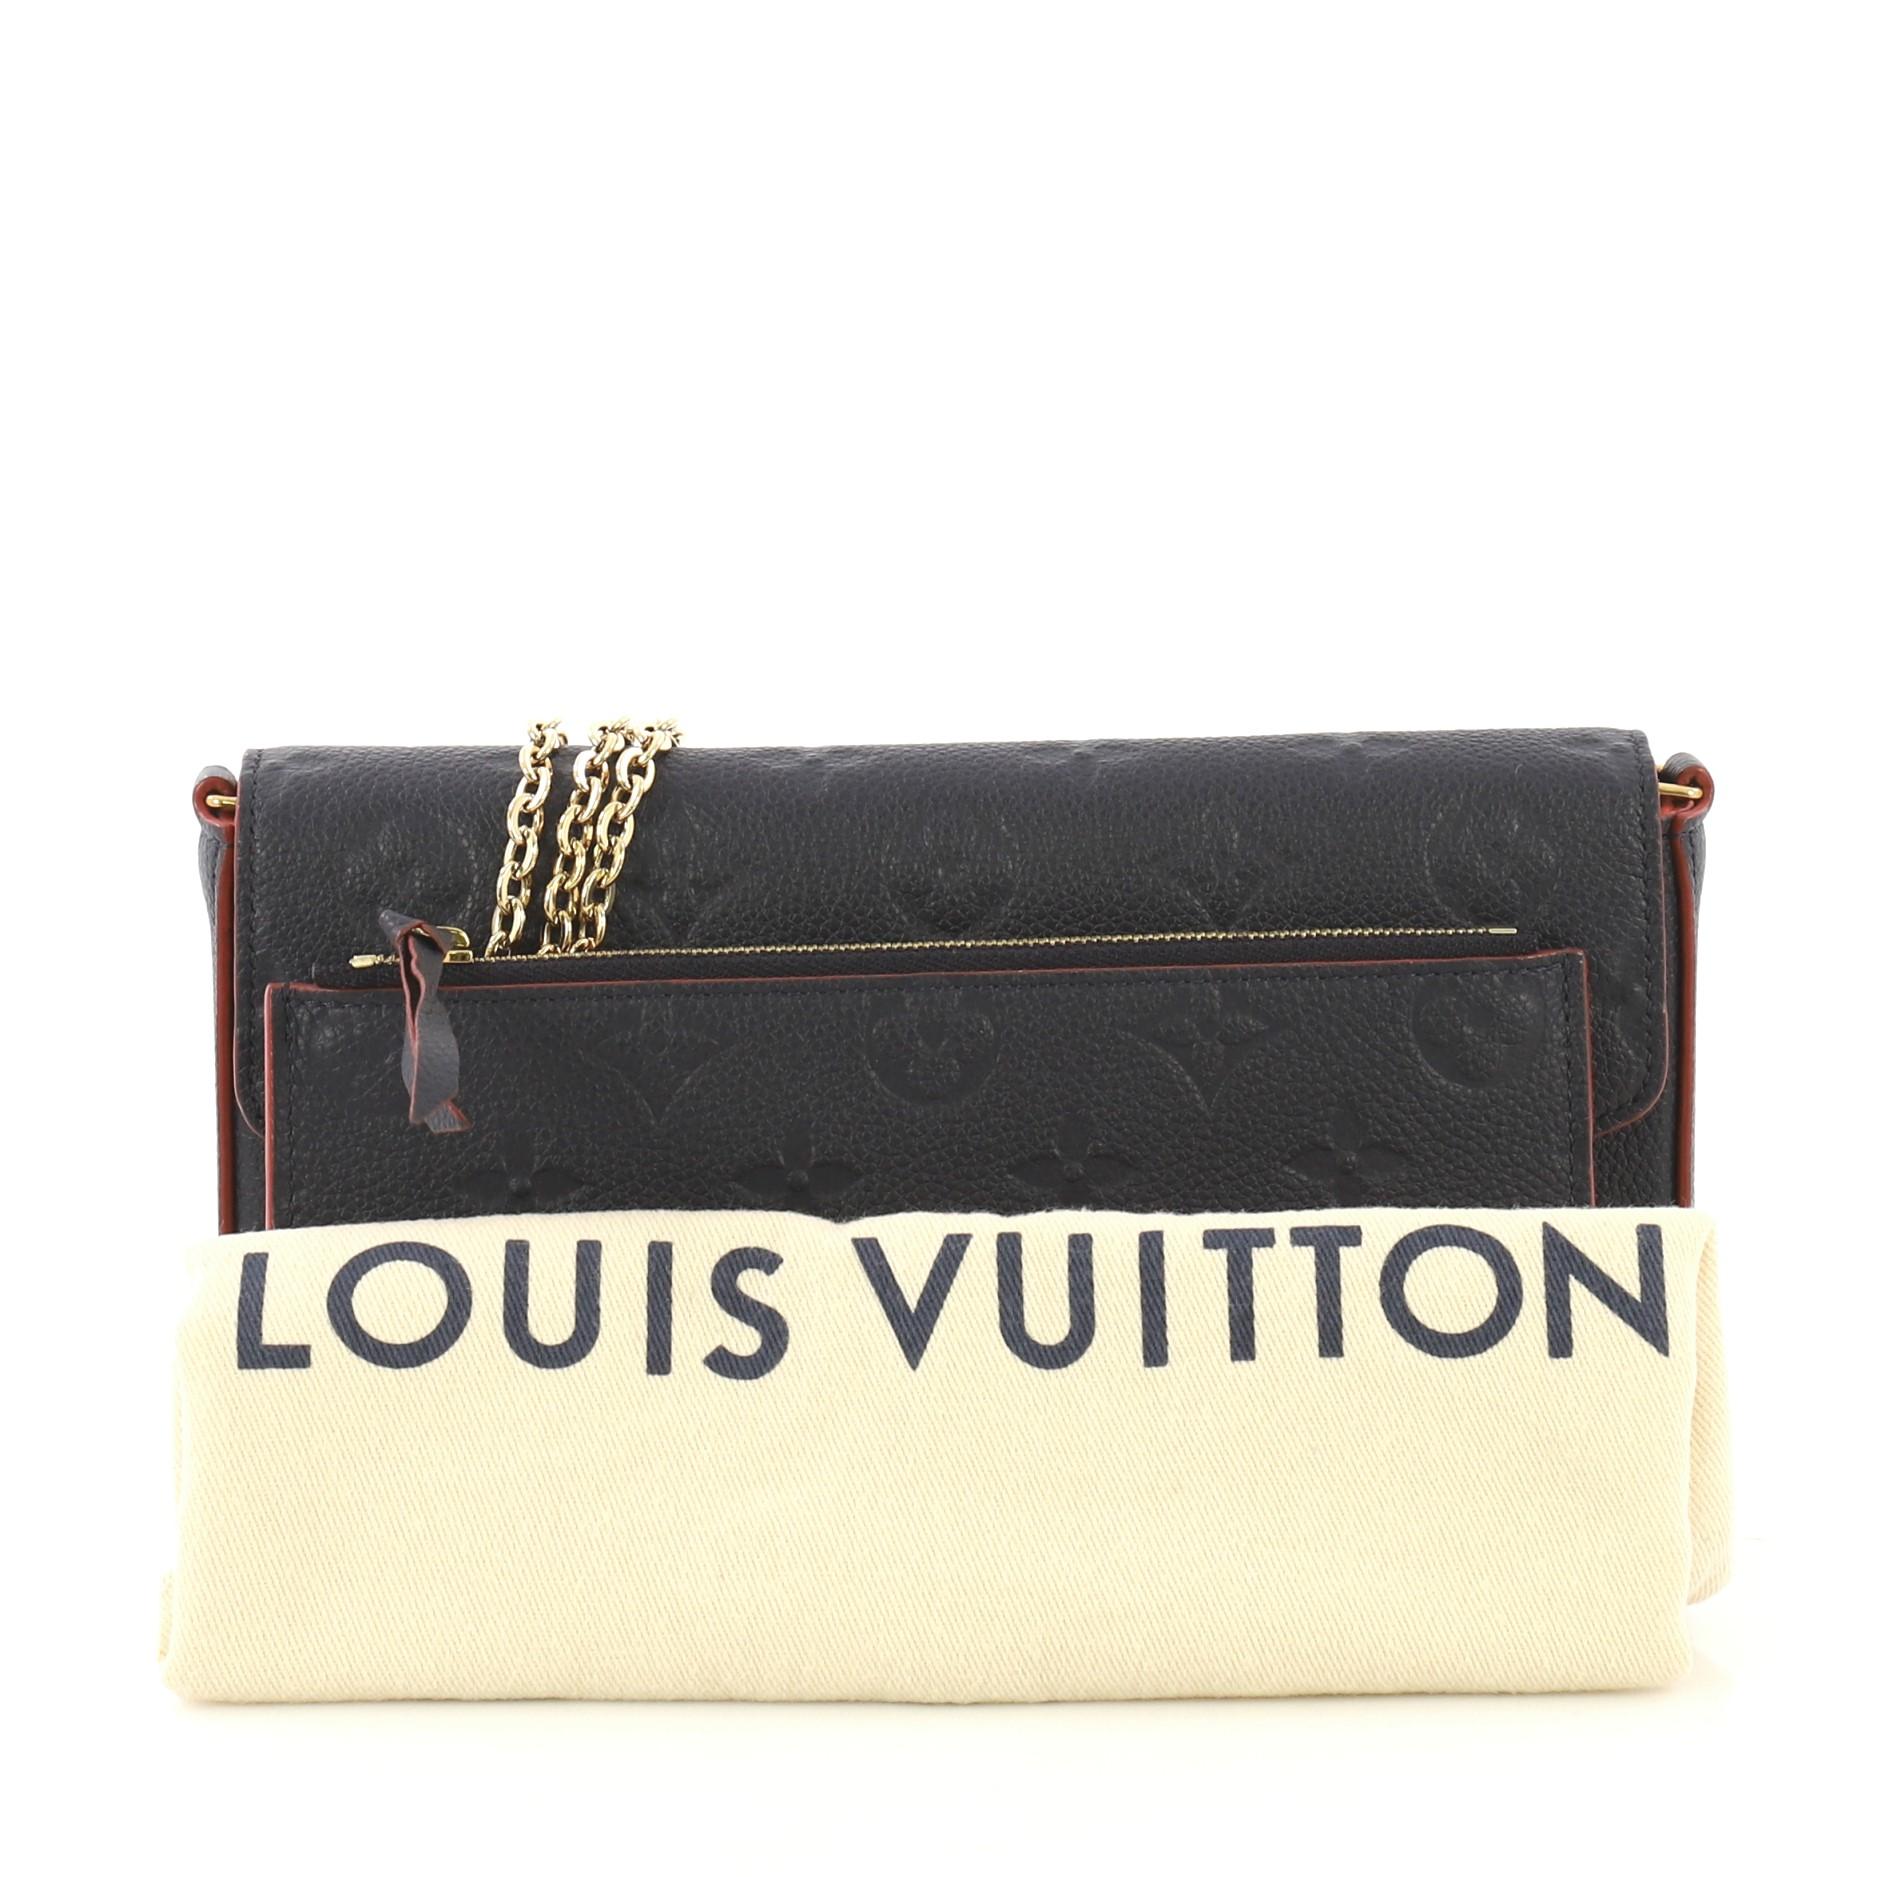 This Louis Vuitton Felicie Pochette Monogram Empreinte Leather, crafted from navy monogram empreinte leather, features a detachable chain strap and gold-tone hardware. Its press stud closure opens to a red fabric interior with slip pocket.